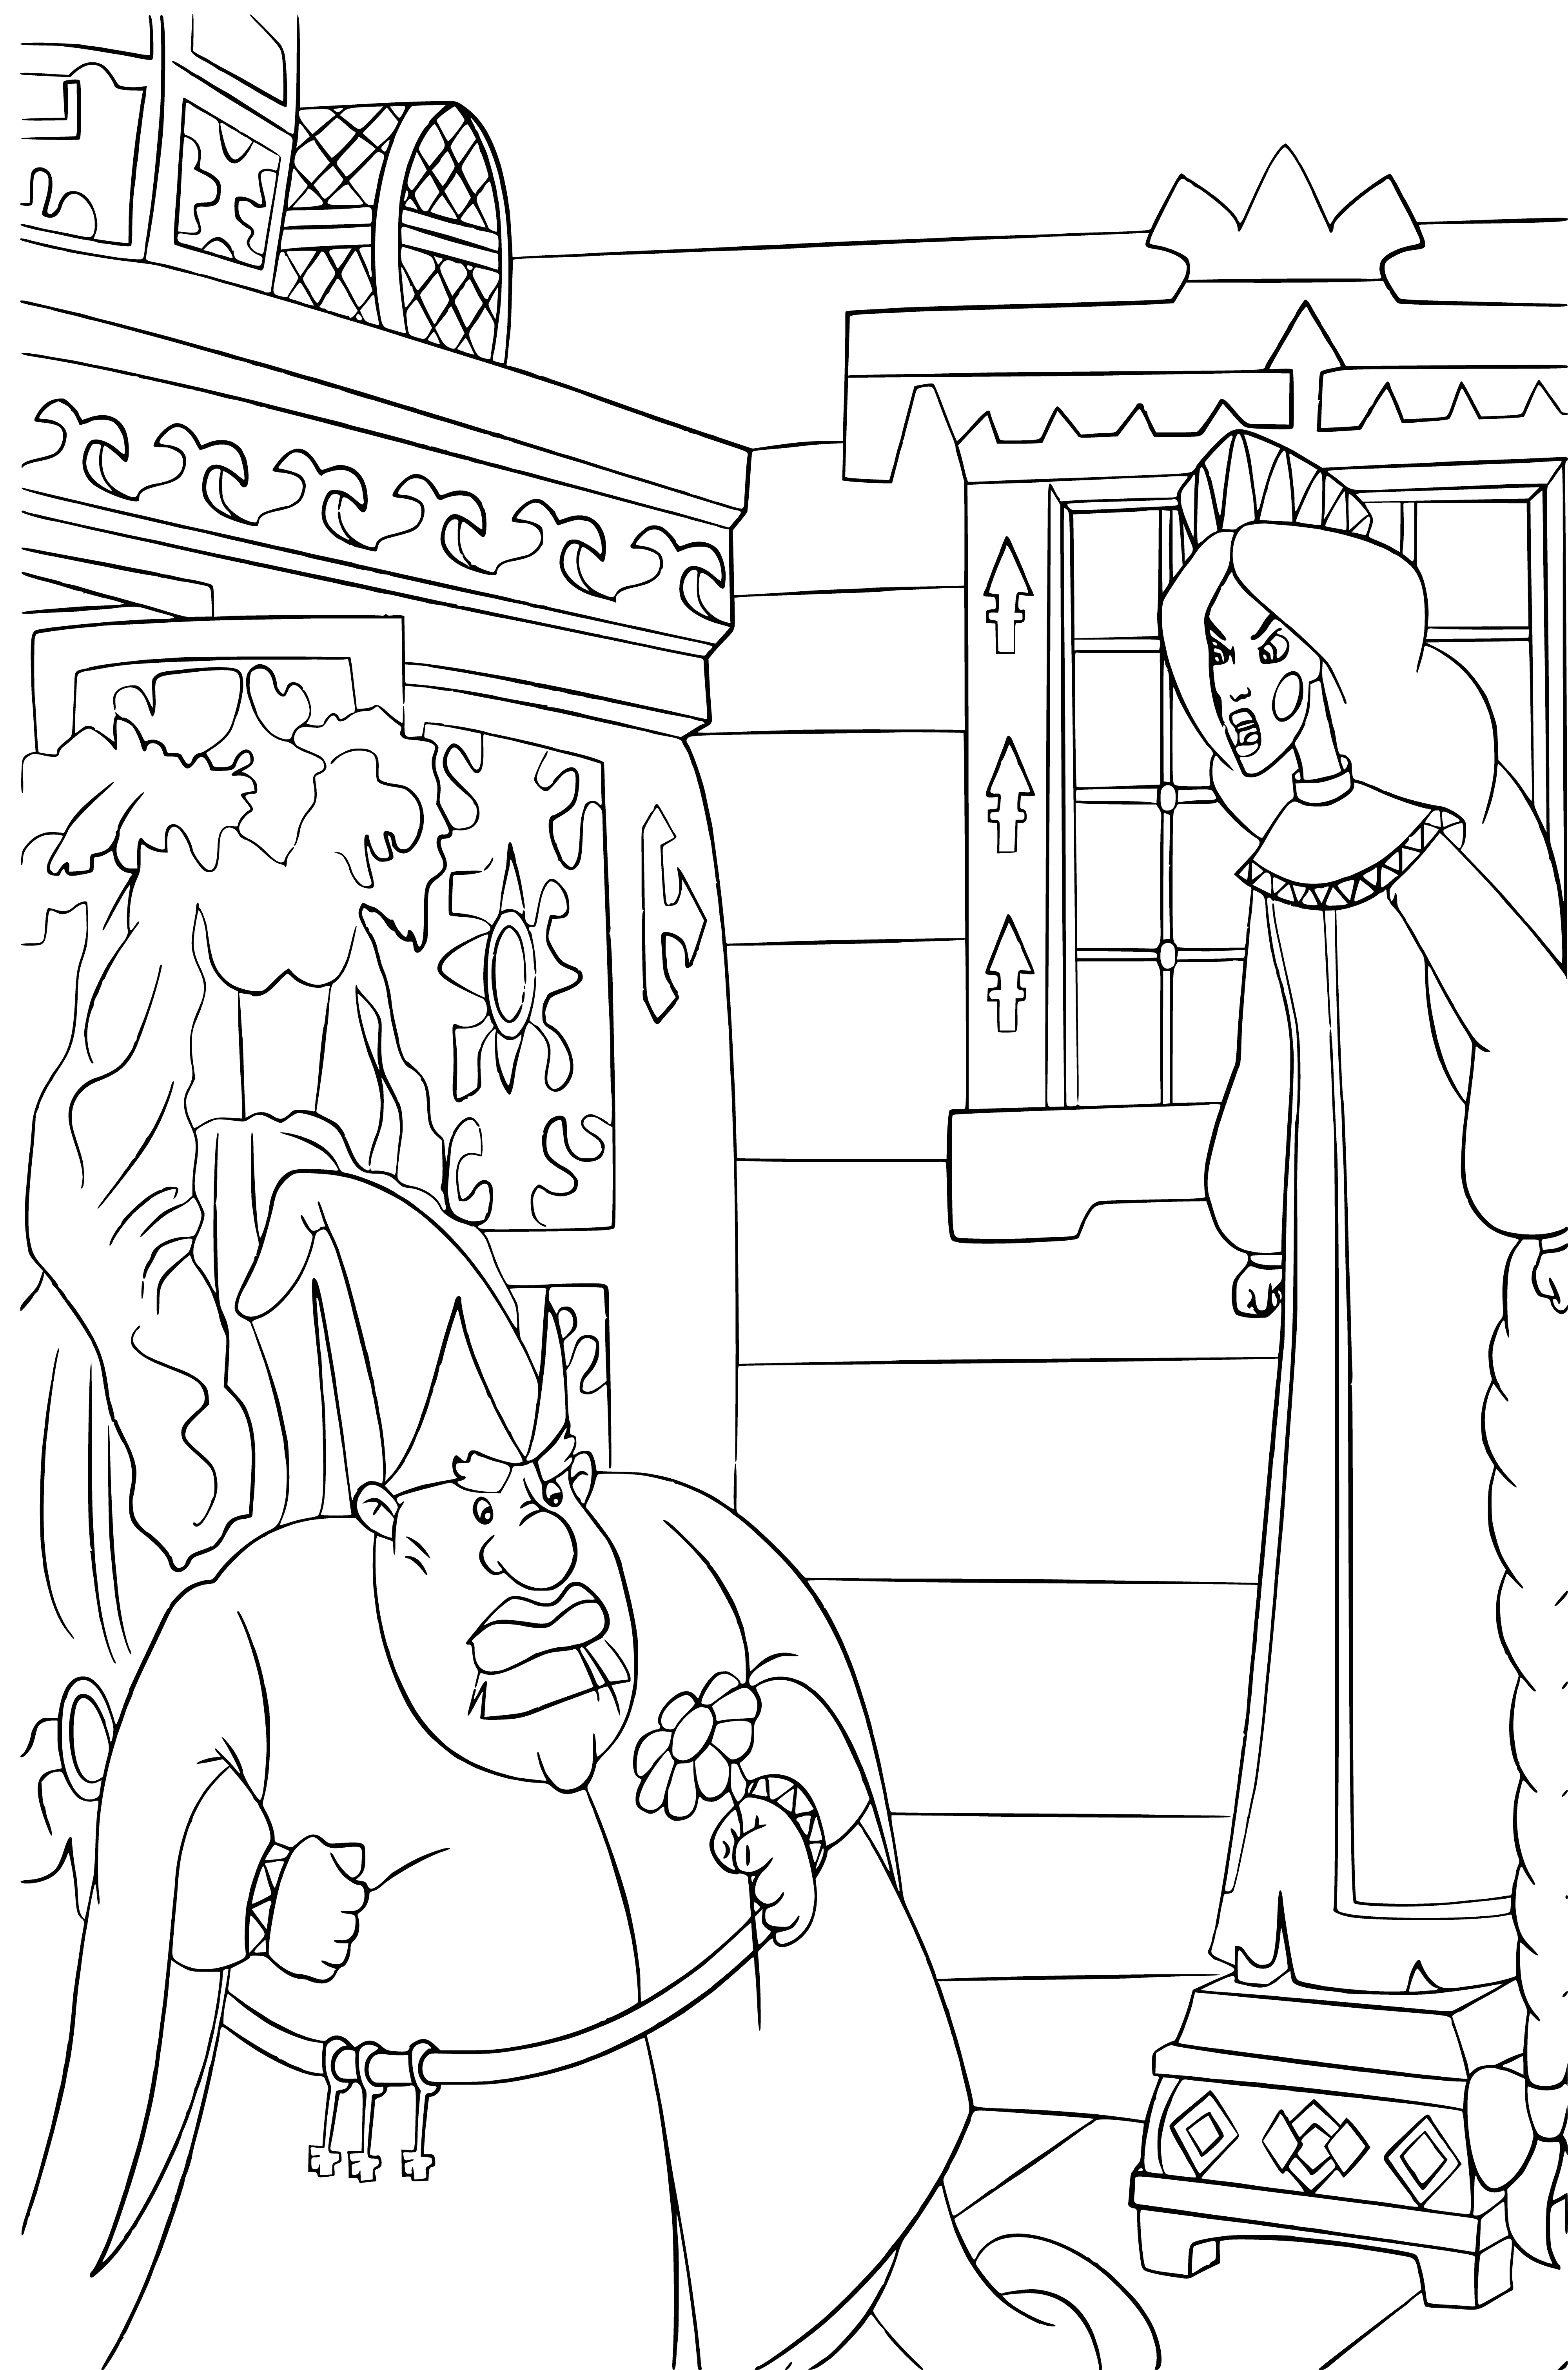 coloring page: Two men battle a giant snake, Dobrynya Nikitich on the snake, Serpent Gorynych on a stool wielding swords.